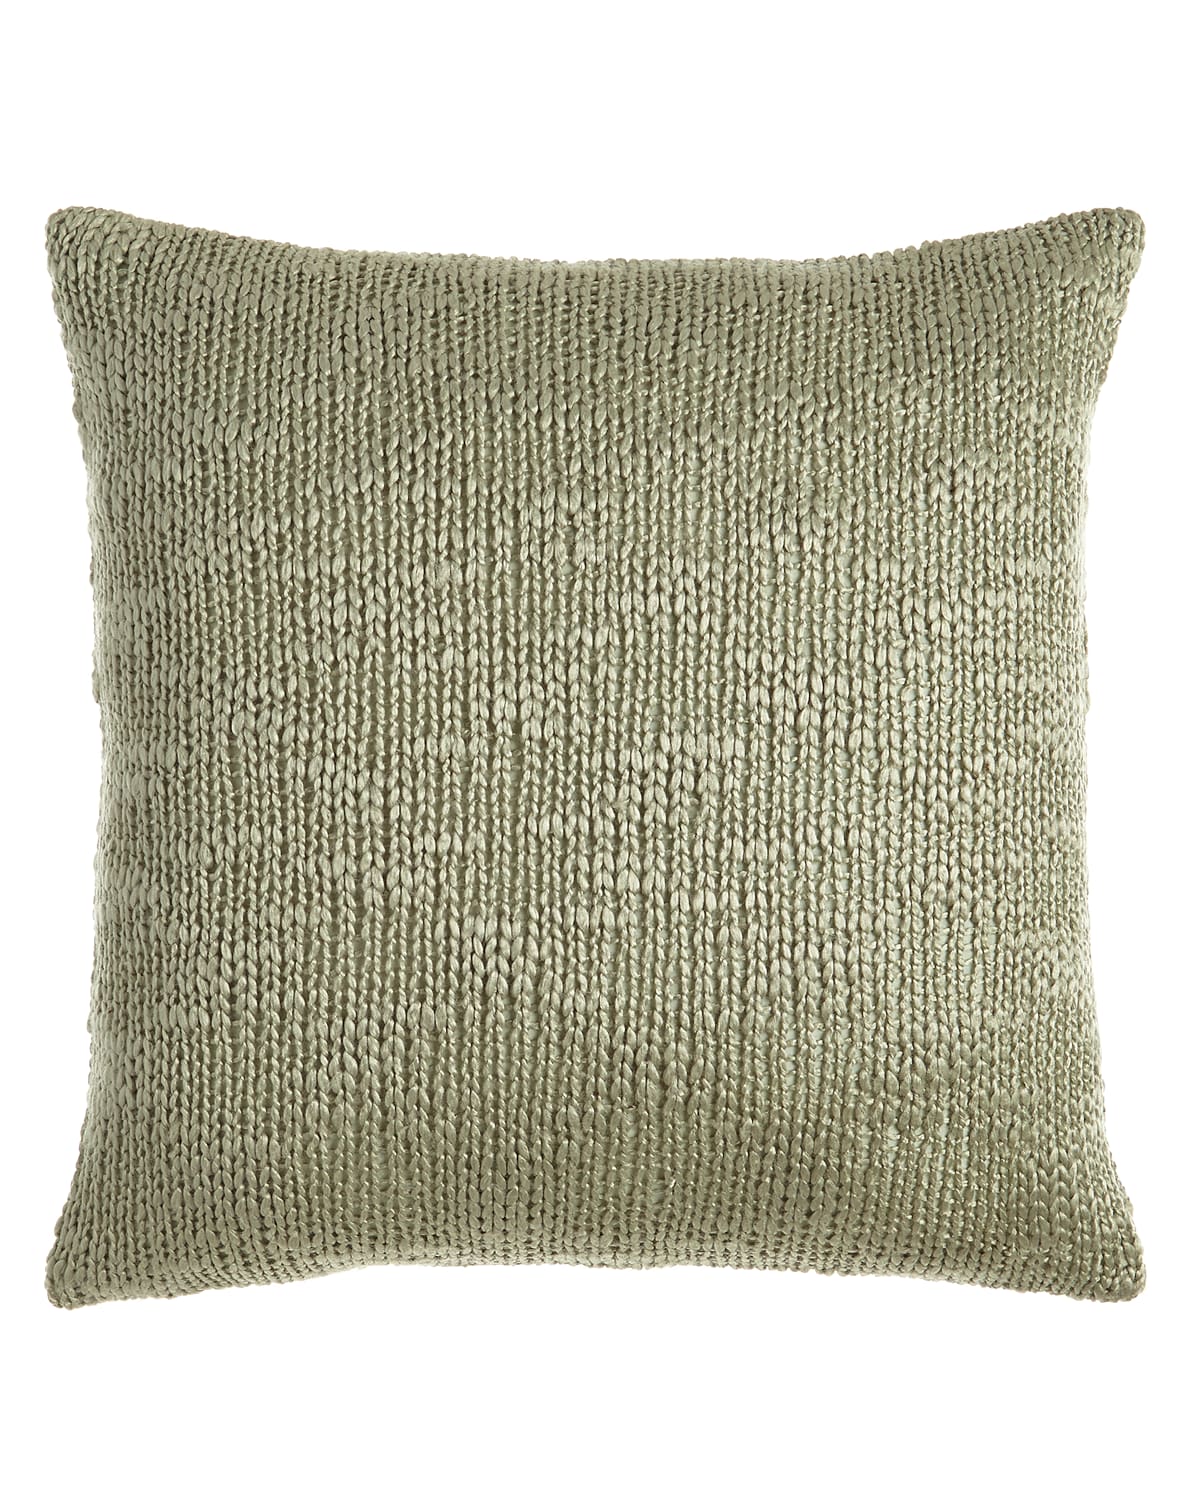 Image Amity Home Declan Pillow, 20"Sq.